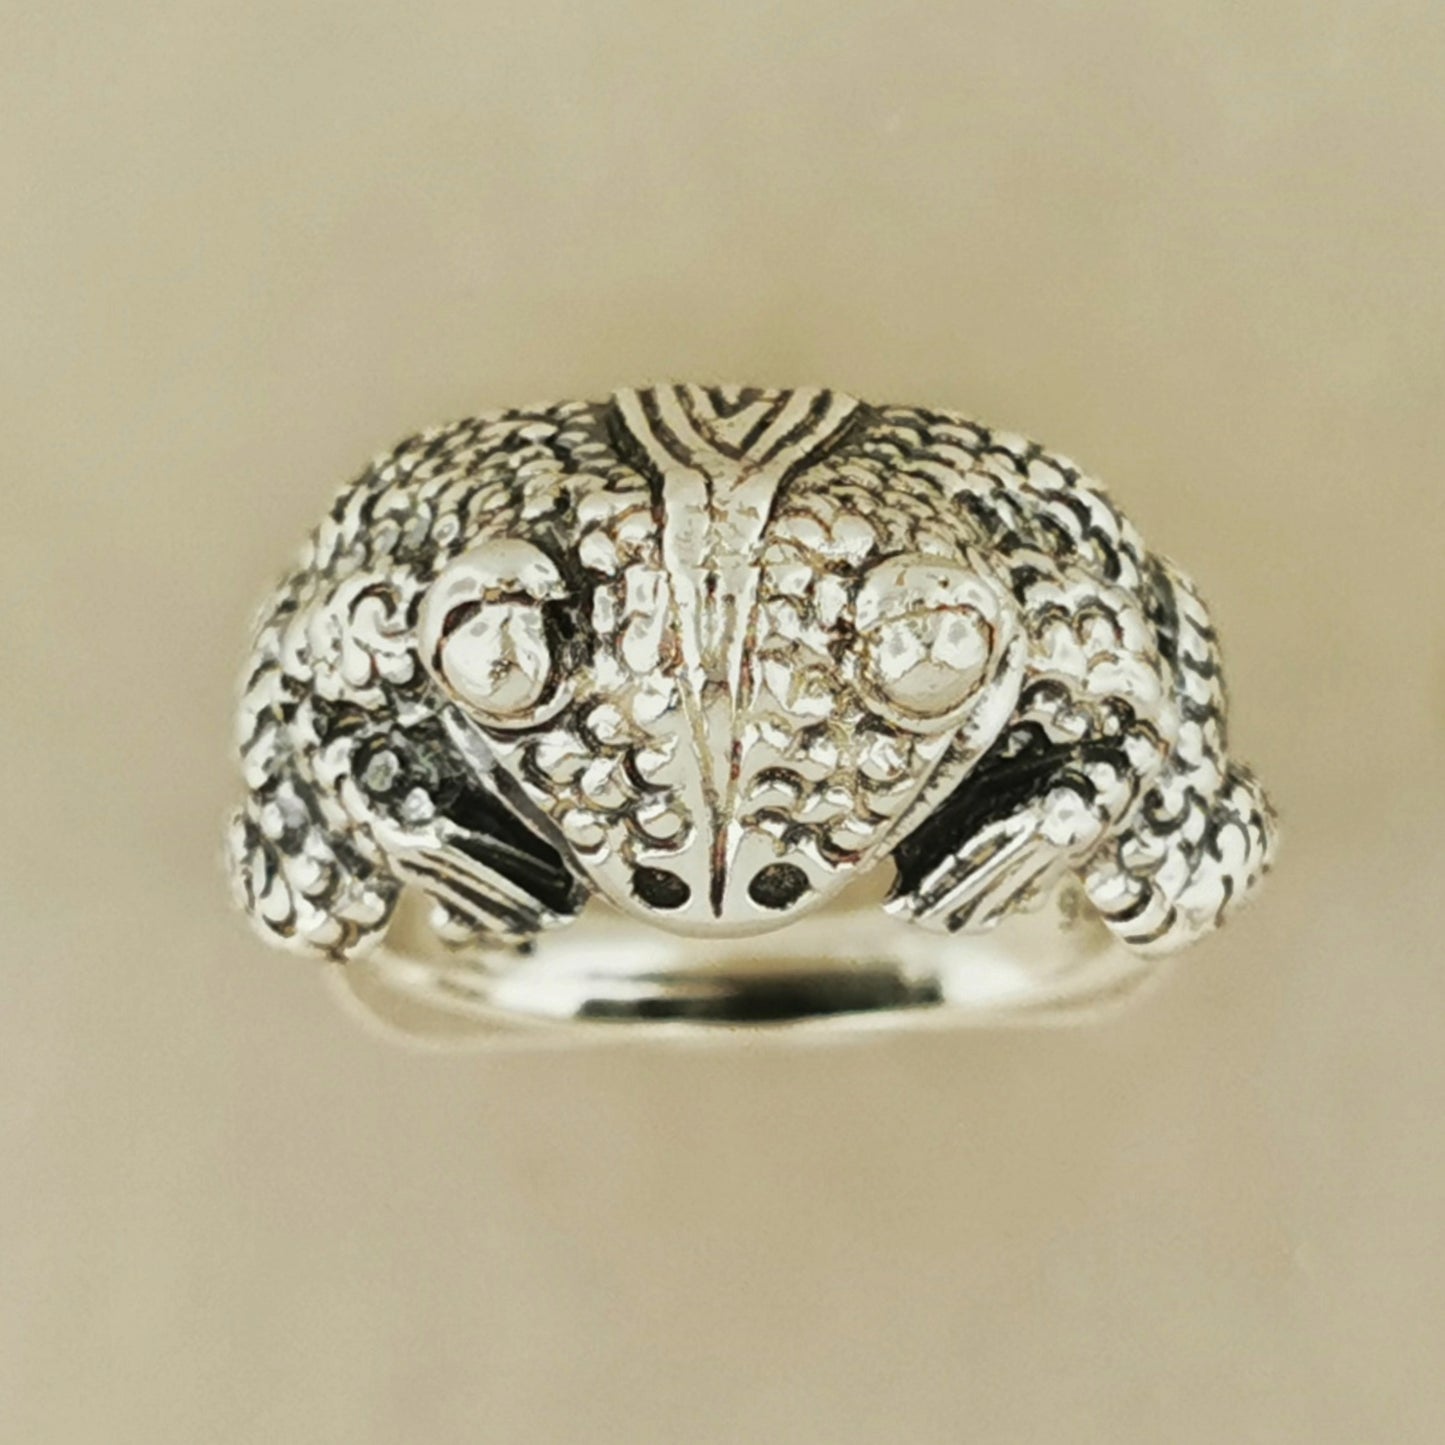 Frog Ring in 925 Silver or Bronze, Frog Lover Jewelry Gift, Retro Style Frog Ring, 3D Animal Ring Jewelry, Silver Frog Jewellery, Animal Lover Gift, Silver Frog Ring, Frog Lover Jewelry, Frog Lover Jewellery, 3D Frog Ring, Frog Lover Ring